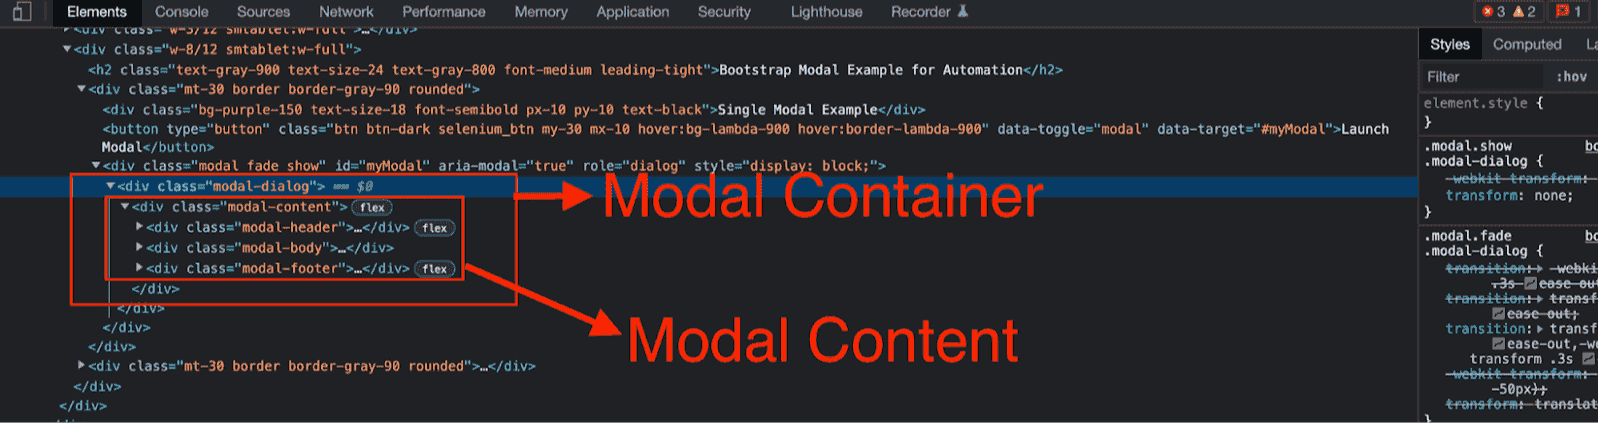 Verify and interact with the modal dialog window